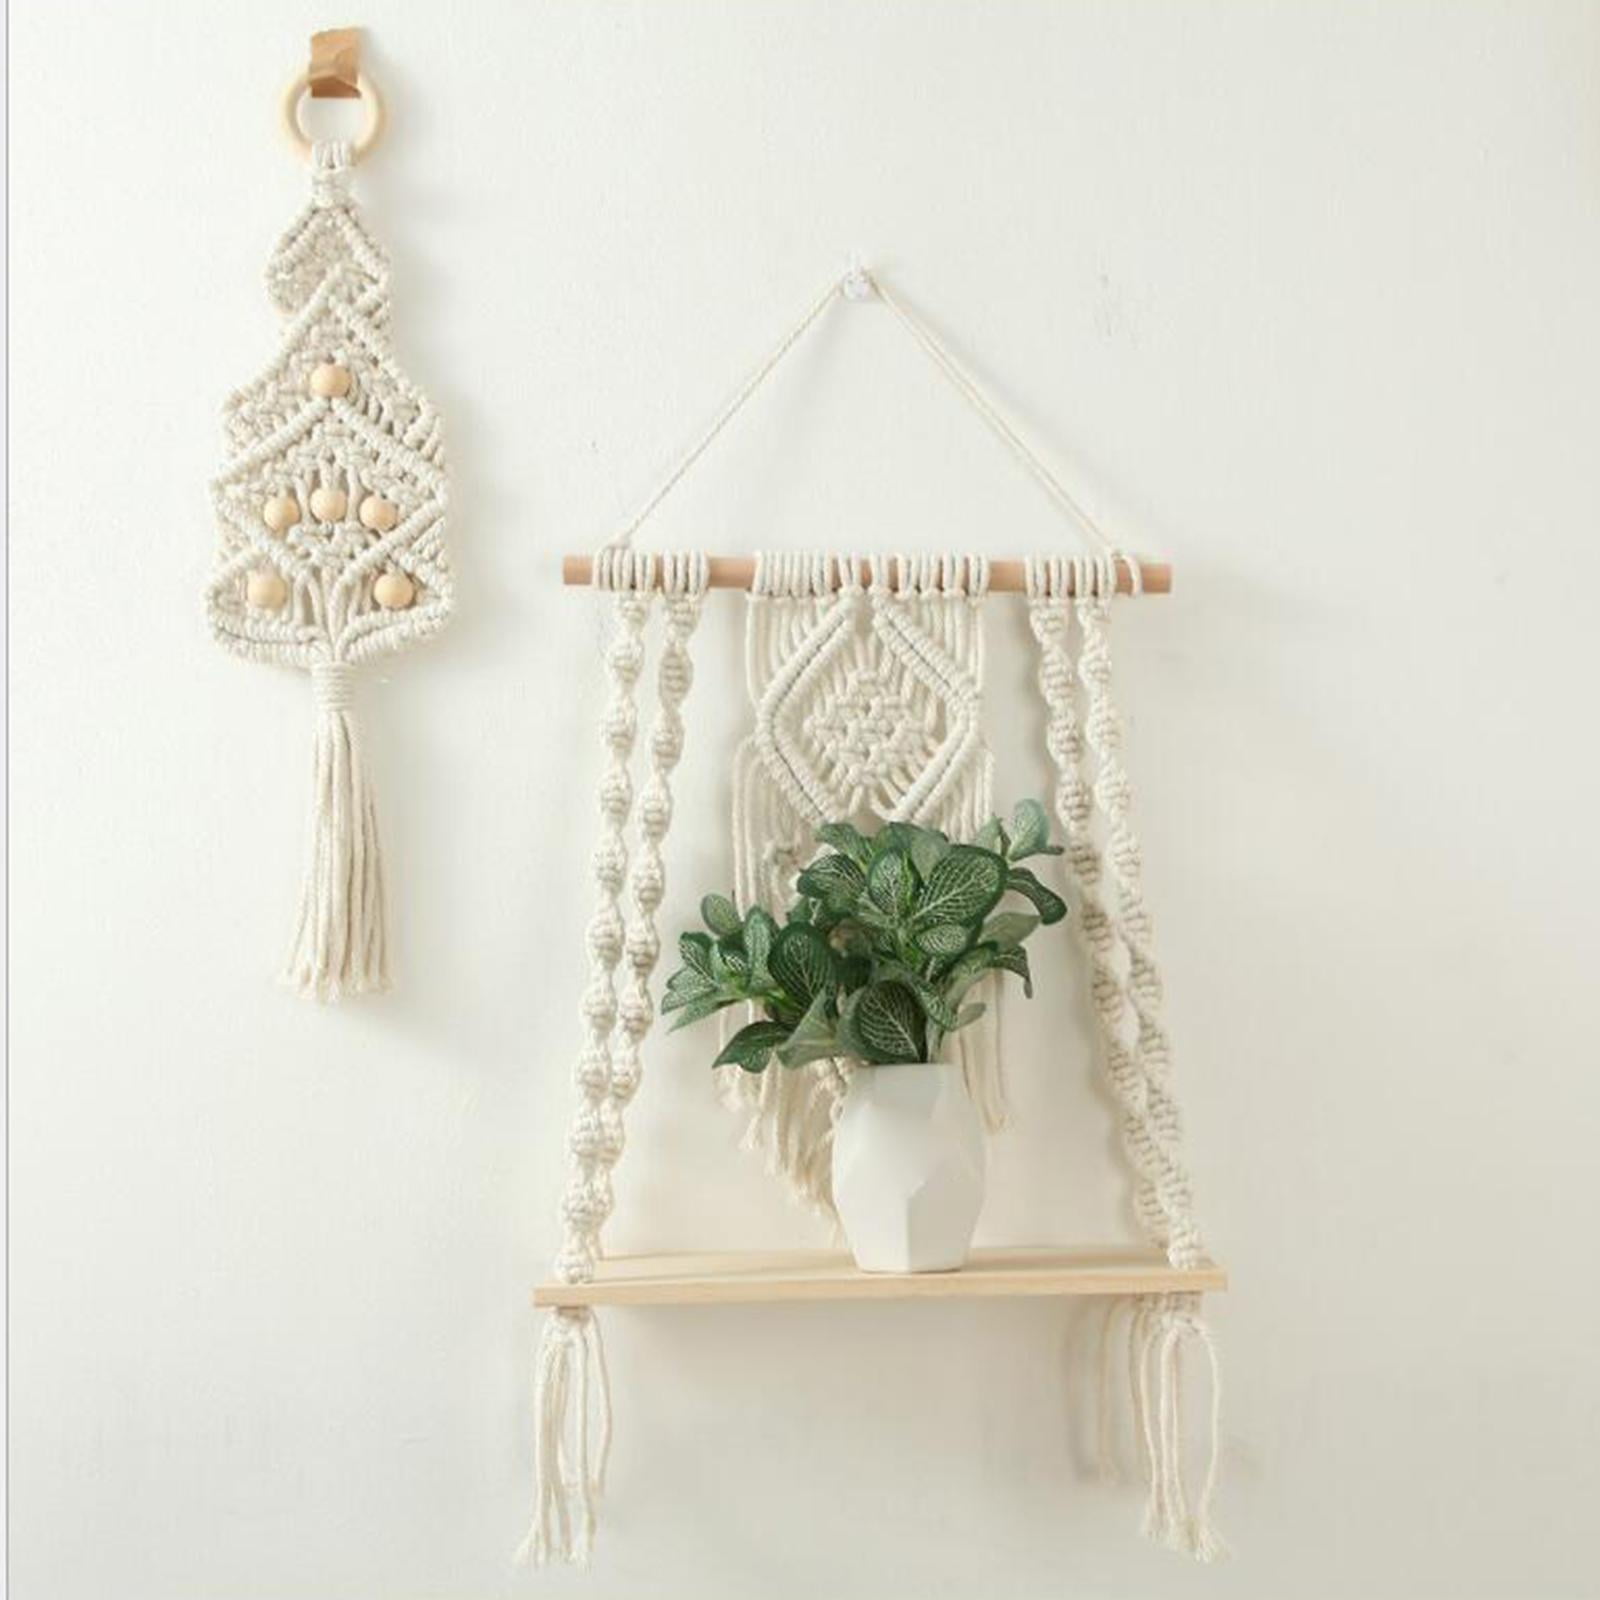 Buy Custom Made Small Bohemian Wall Hanging Tapestry Wall Hanging, Macrame  Decor, made to order from MamaRugs